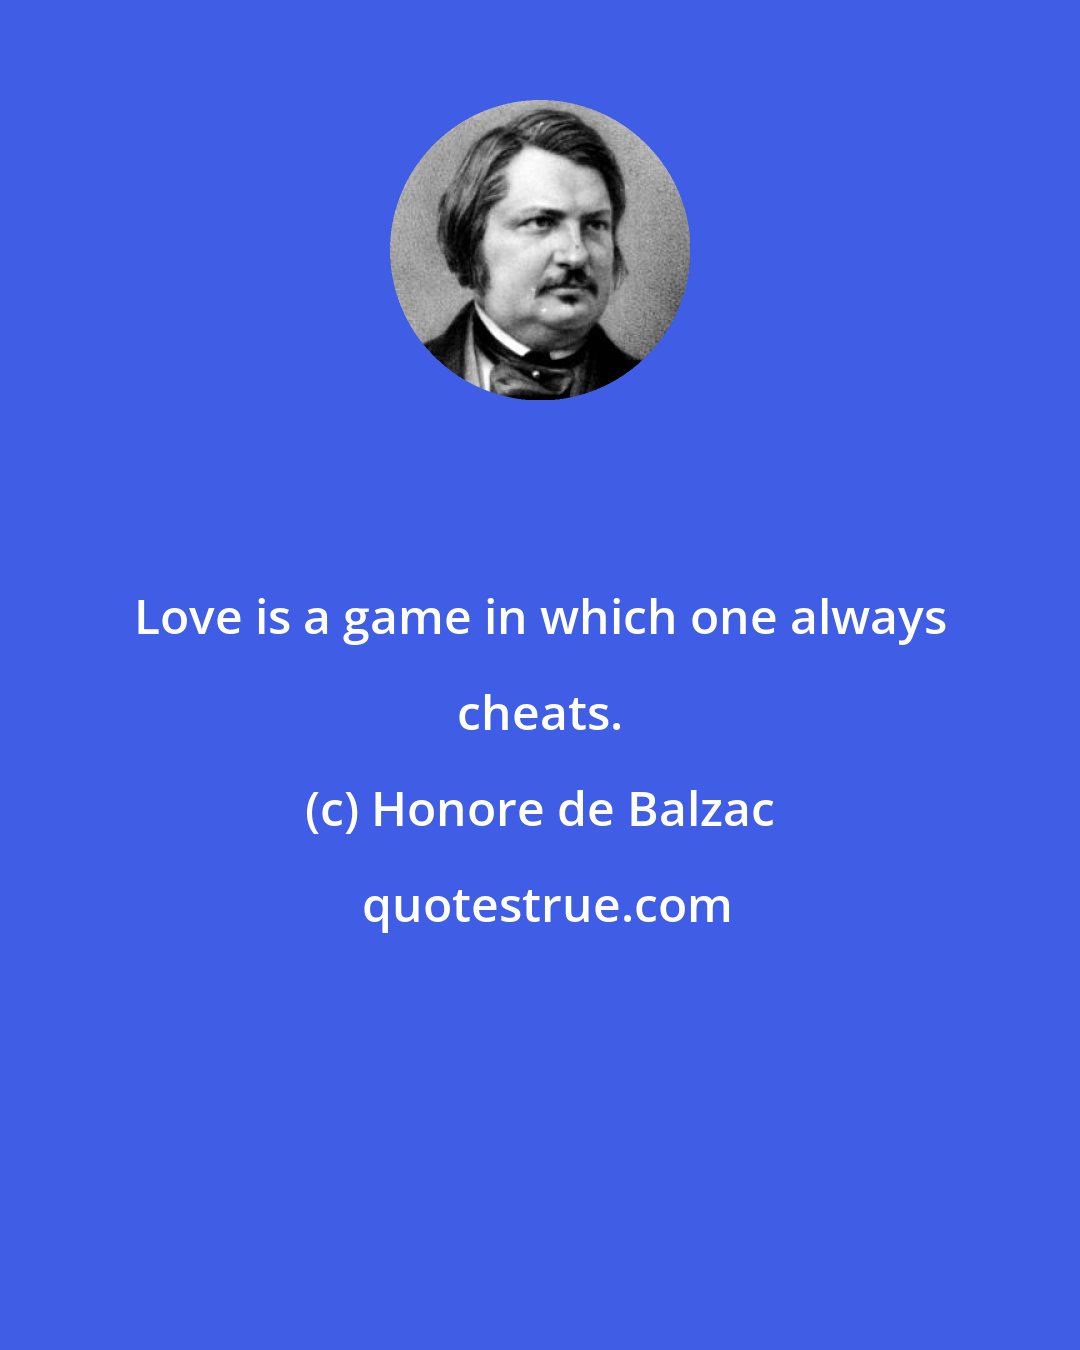 Honore de Balzac: Love is a game in which one always cheats.